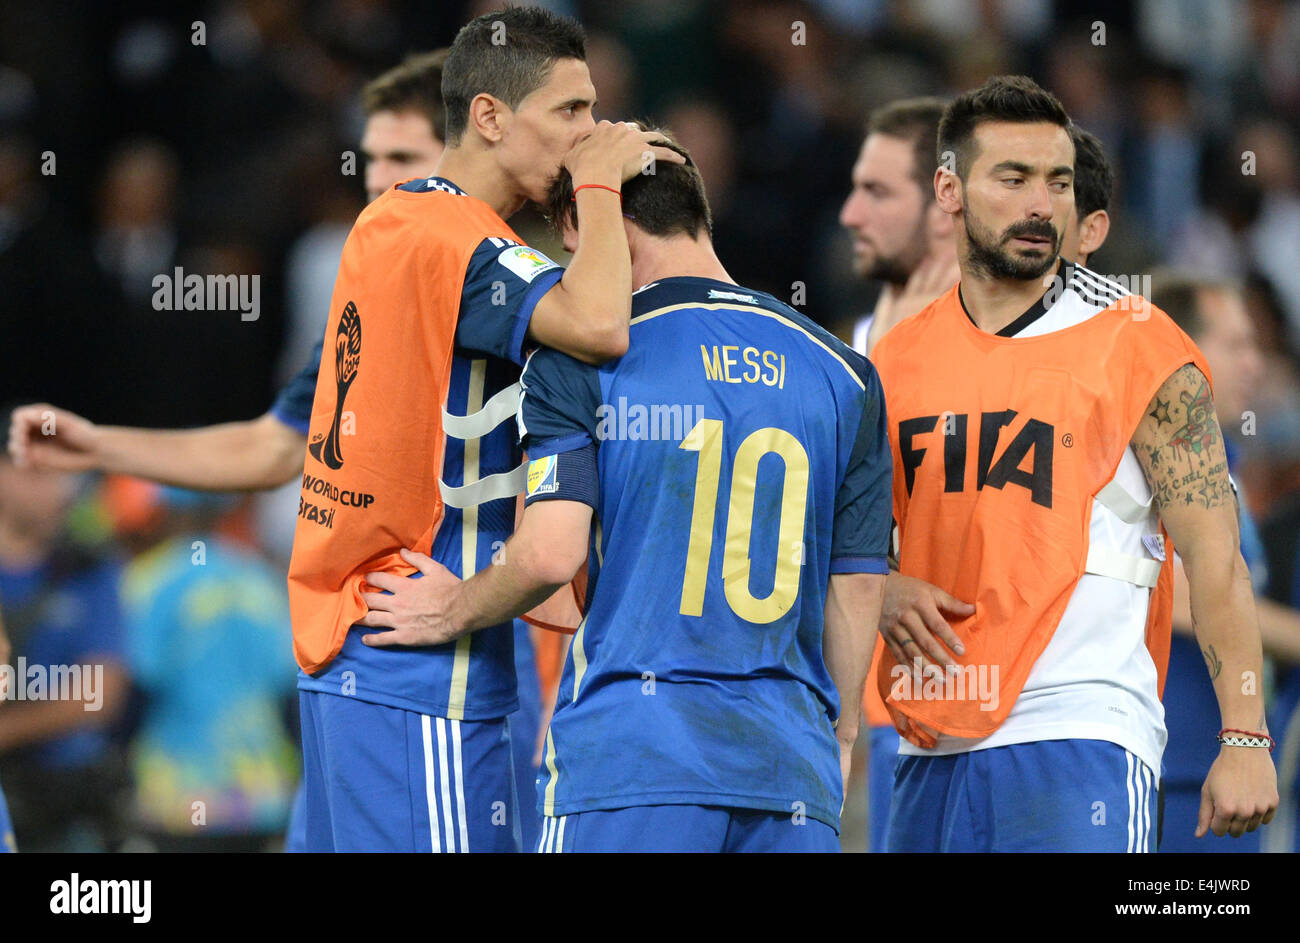 Rio de Janeiro, Brazil. 13th July, 2014. Lionel Messi (C) of Argentina looks dejected next to Ezequiel Lavezzi (R) after the FIFA World Cup 2014 final soccer match between Germany and Argentina at the Estadio do Maracana in Rio de Janeiro, Brazil, 13 July 2014. Photo: Marcus Brandt/dpa/Alamy Live News Stock Photo